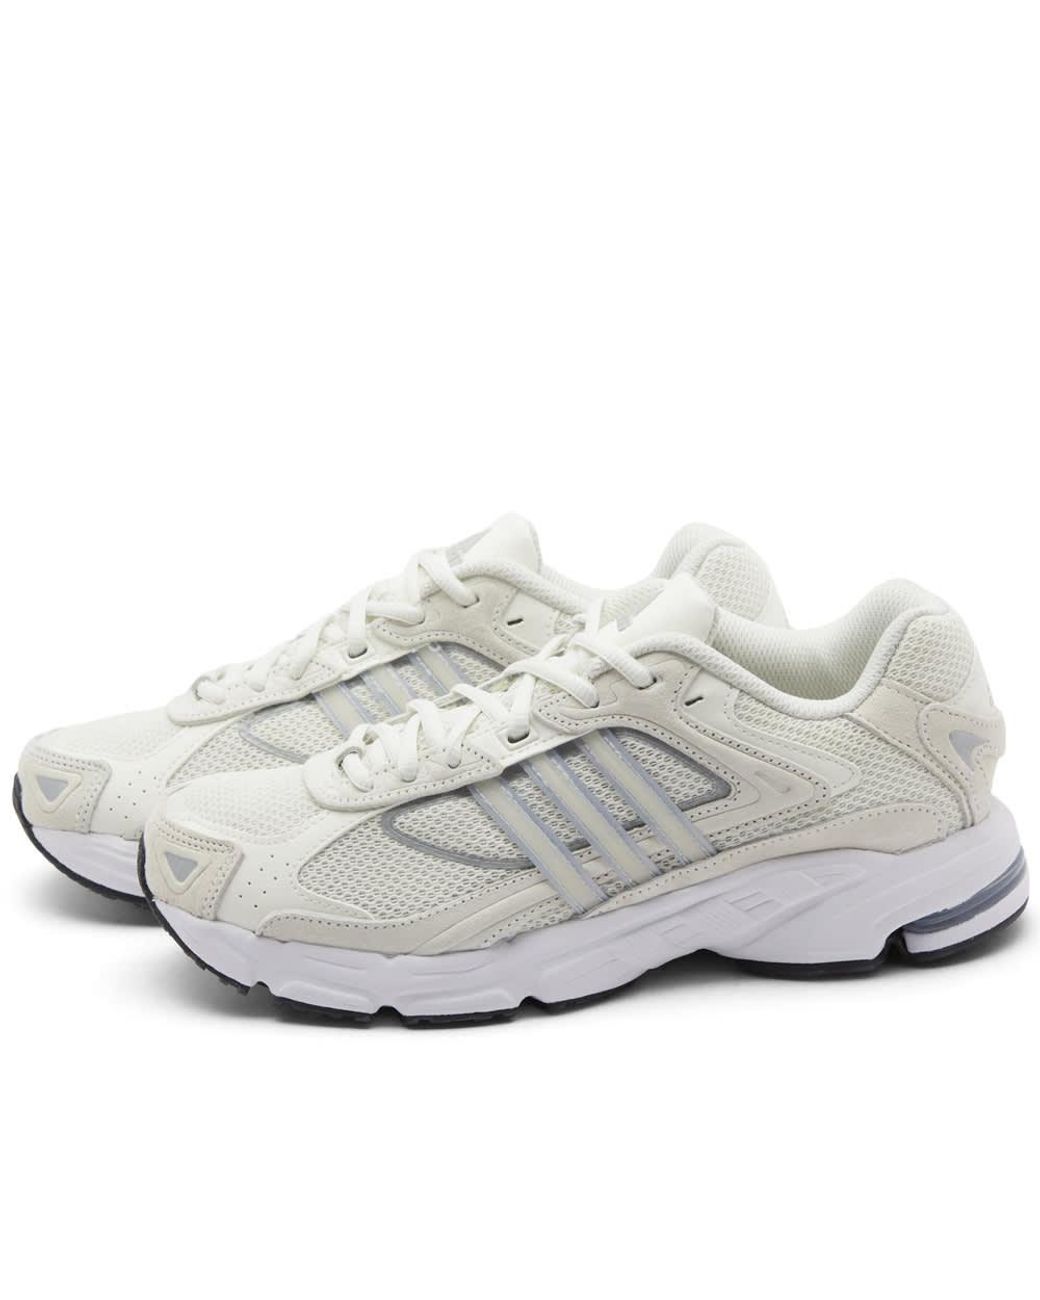 adidas Response Cl W Sneakers in White | Lyst